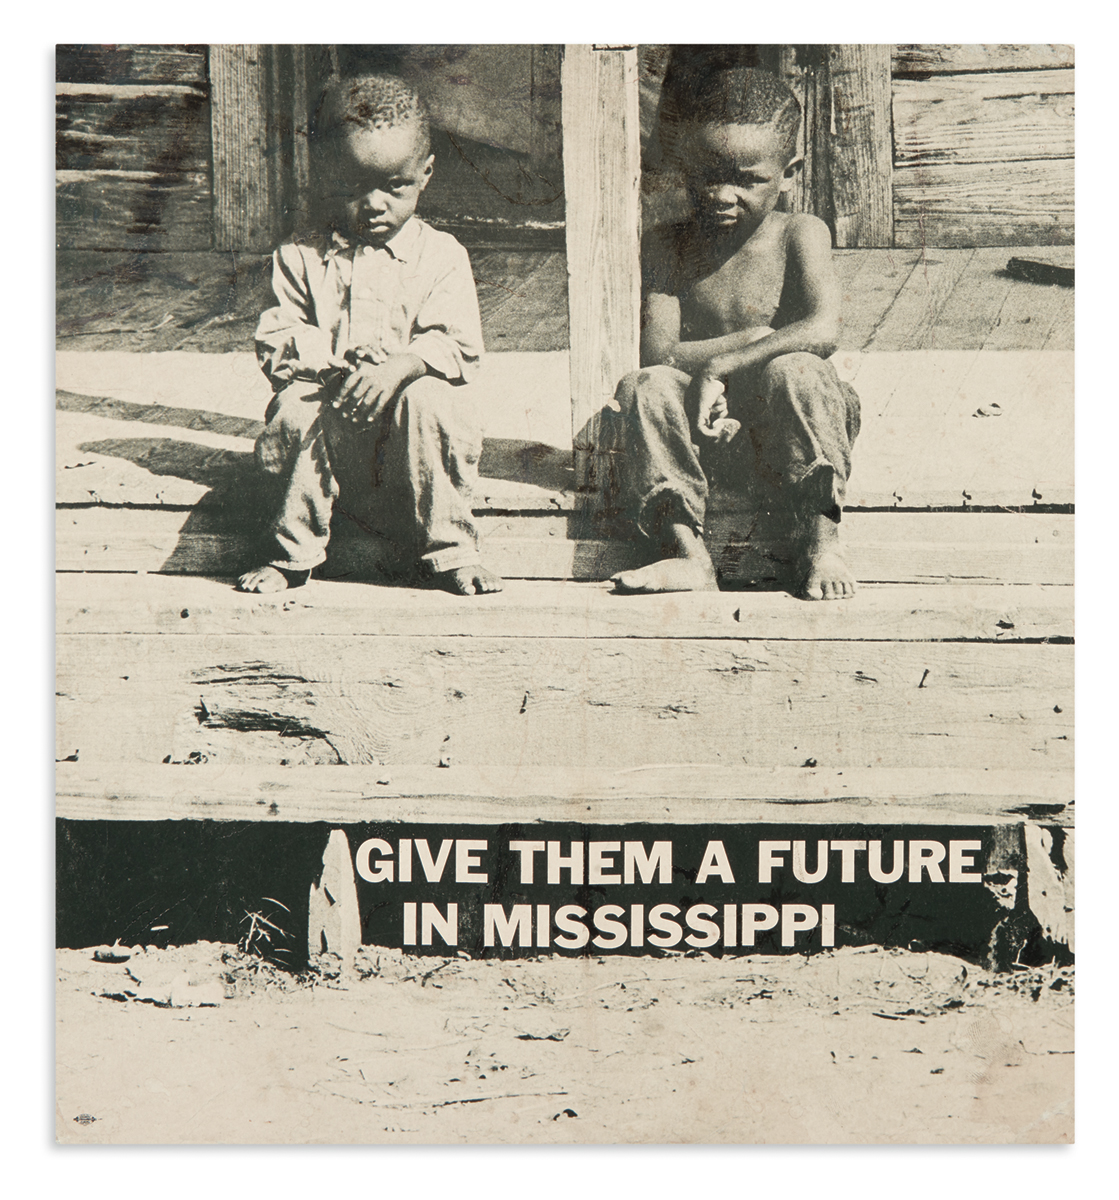 (CIVIL RIGHTS.) Give Them a Future in Mississippi.